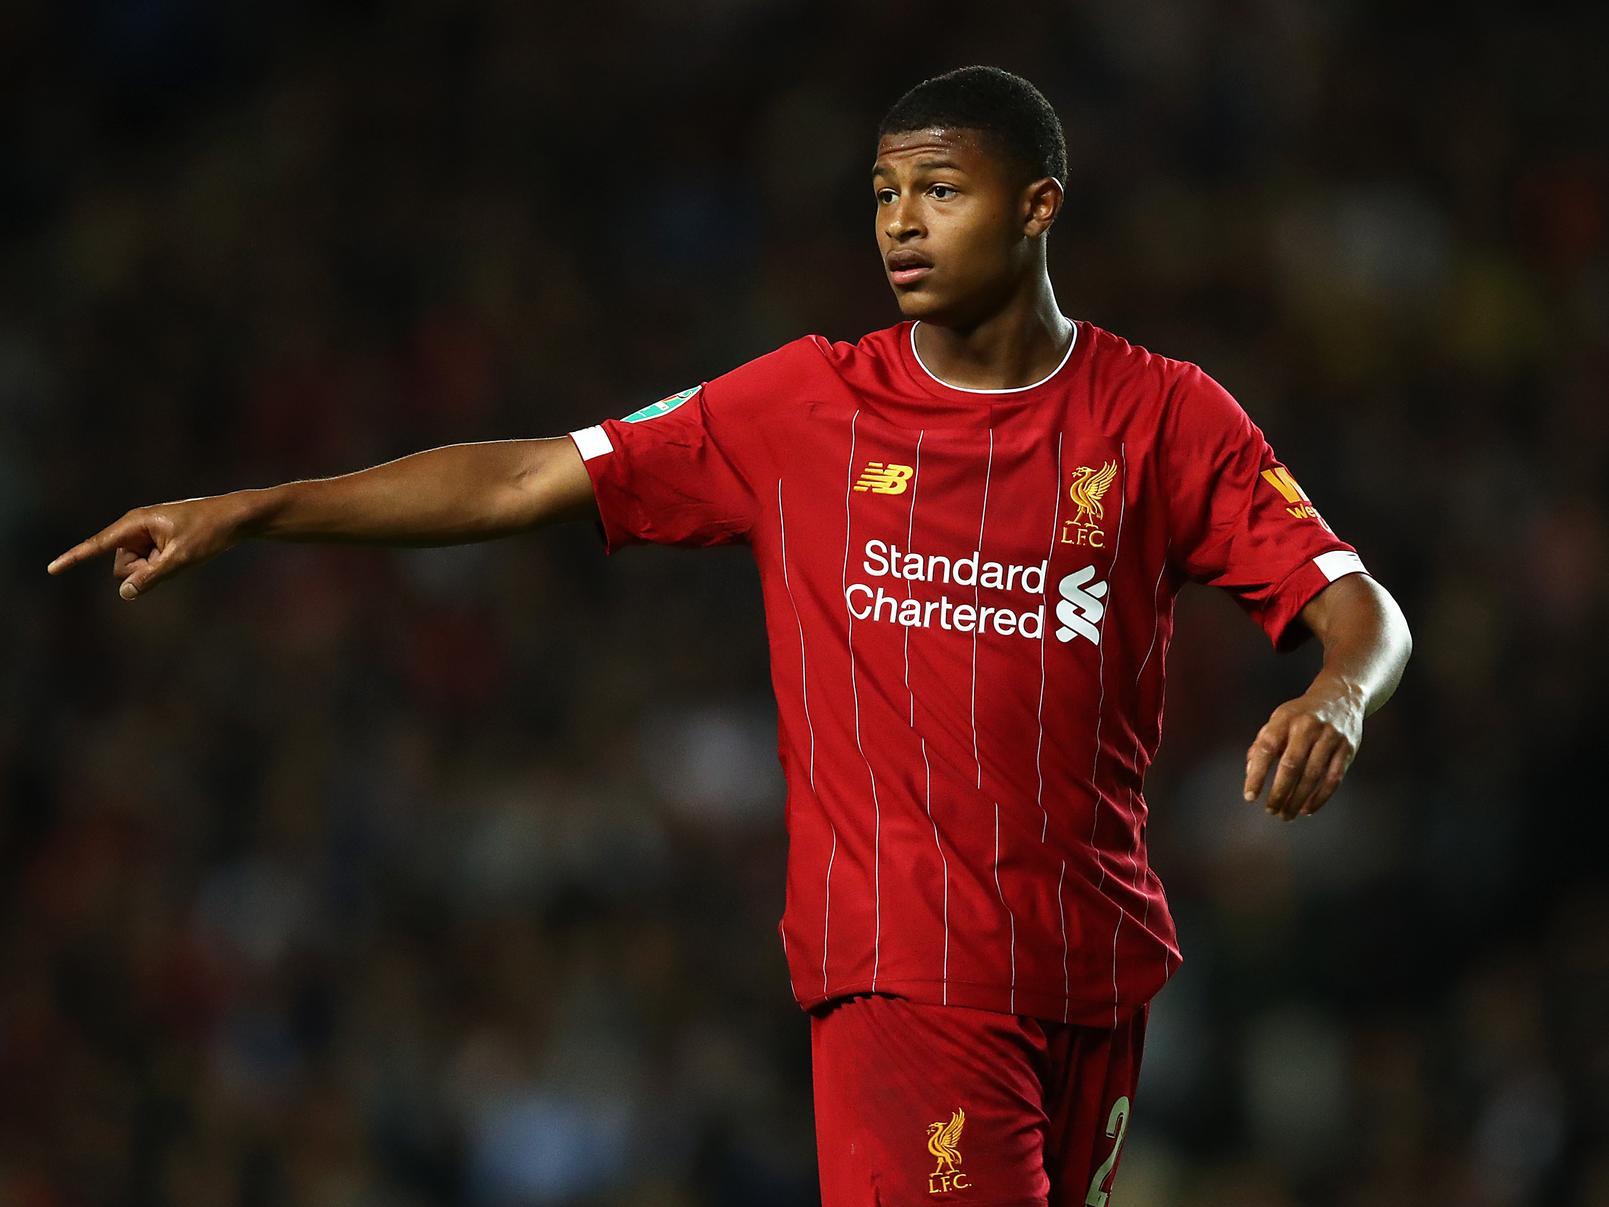 Swansea City are among a number of sides looking to sign Liverpool striker Rhian Brewster on loan, though he could opt to join Premier League side Crystal Palace instead. (Liverpool Echo)